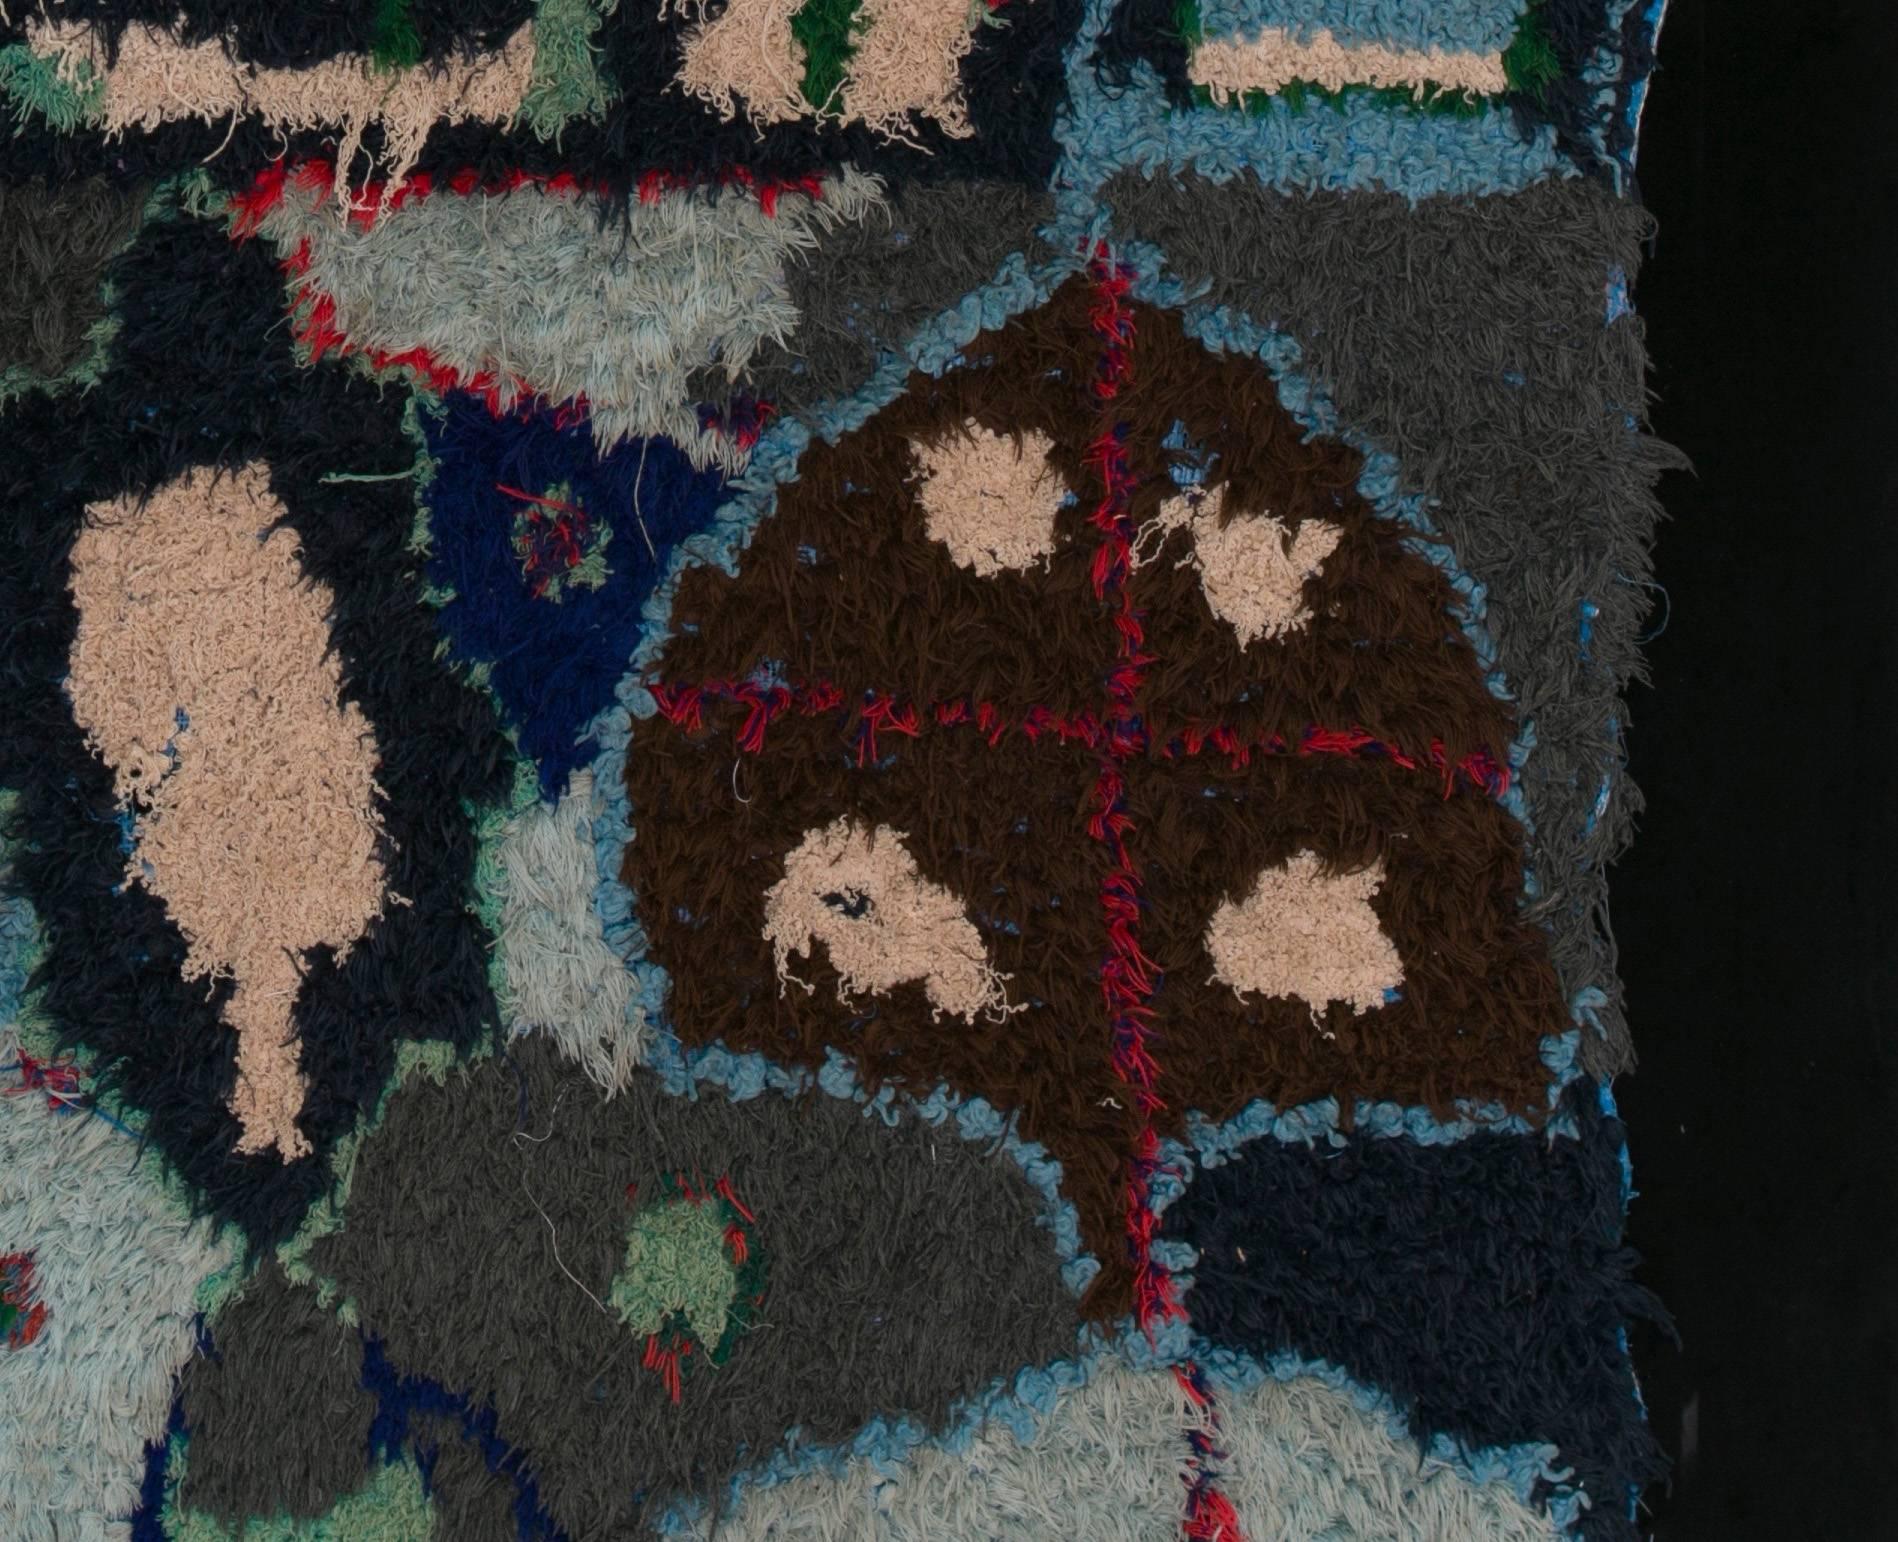 Tapestry made by Berber women from the Atlas Mountains.

This unique and vintage work is made of embroidered woolen ends on wasted grain bags. 

The patterns and harmony of the blue colors are amazing when we refer to the conditions and the